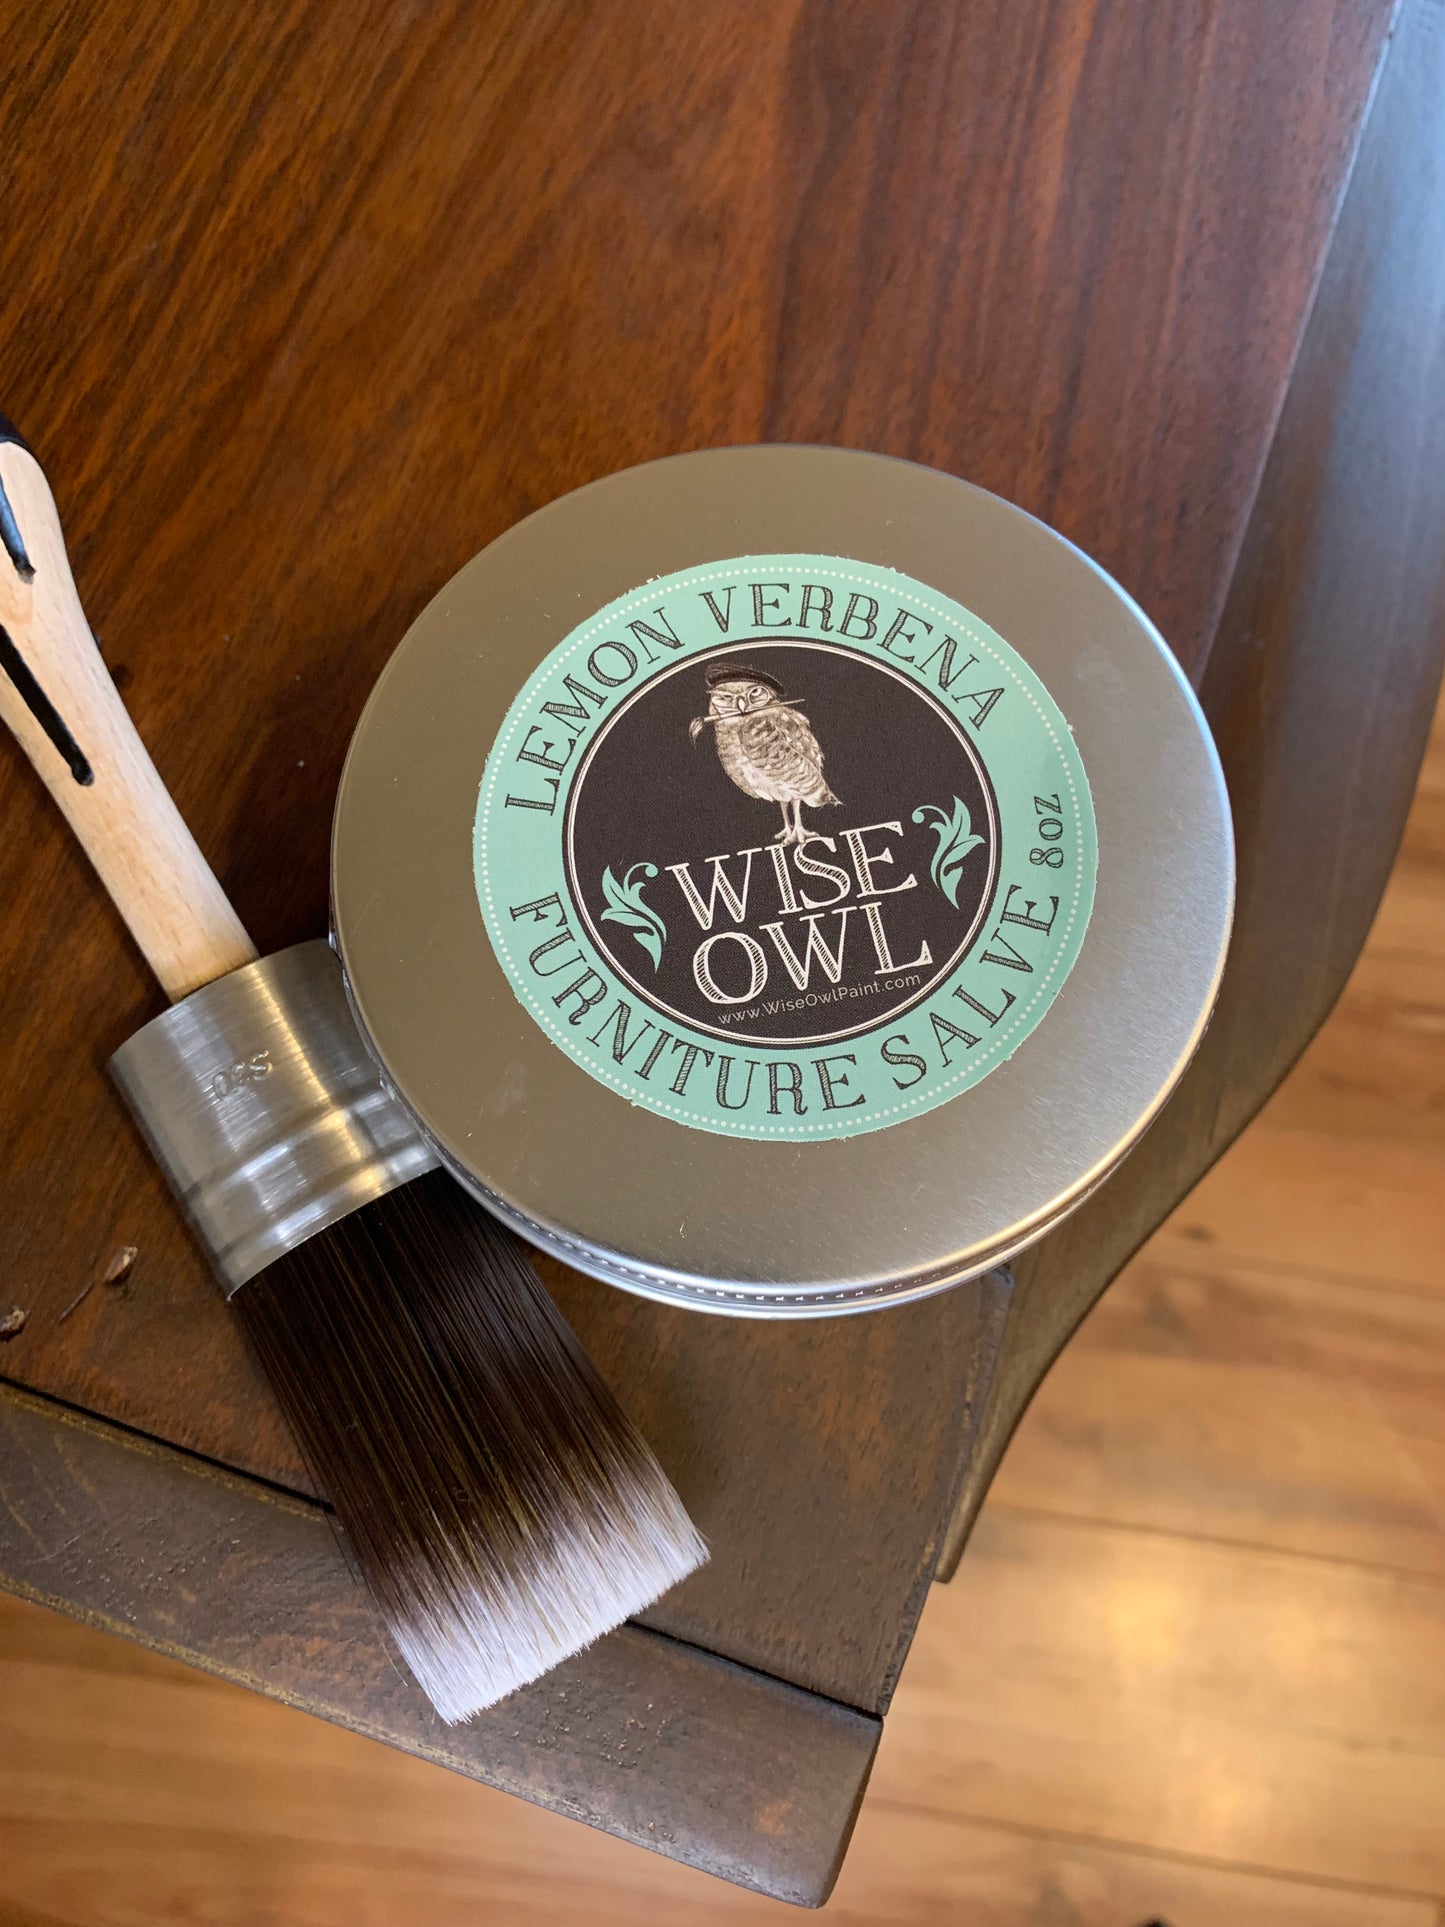 How-To Use Wise Owl Furniture Salve